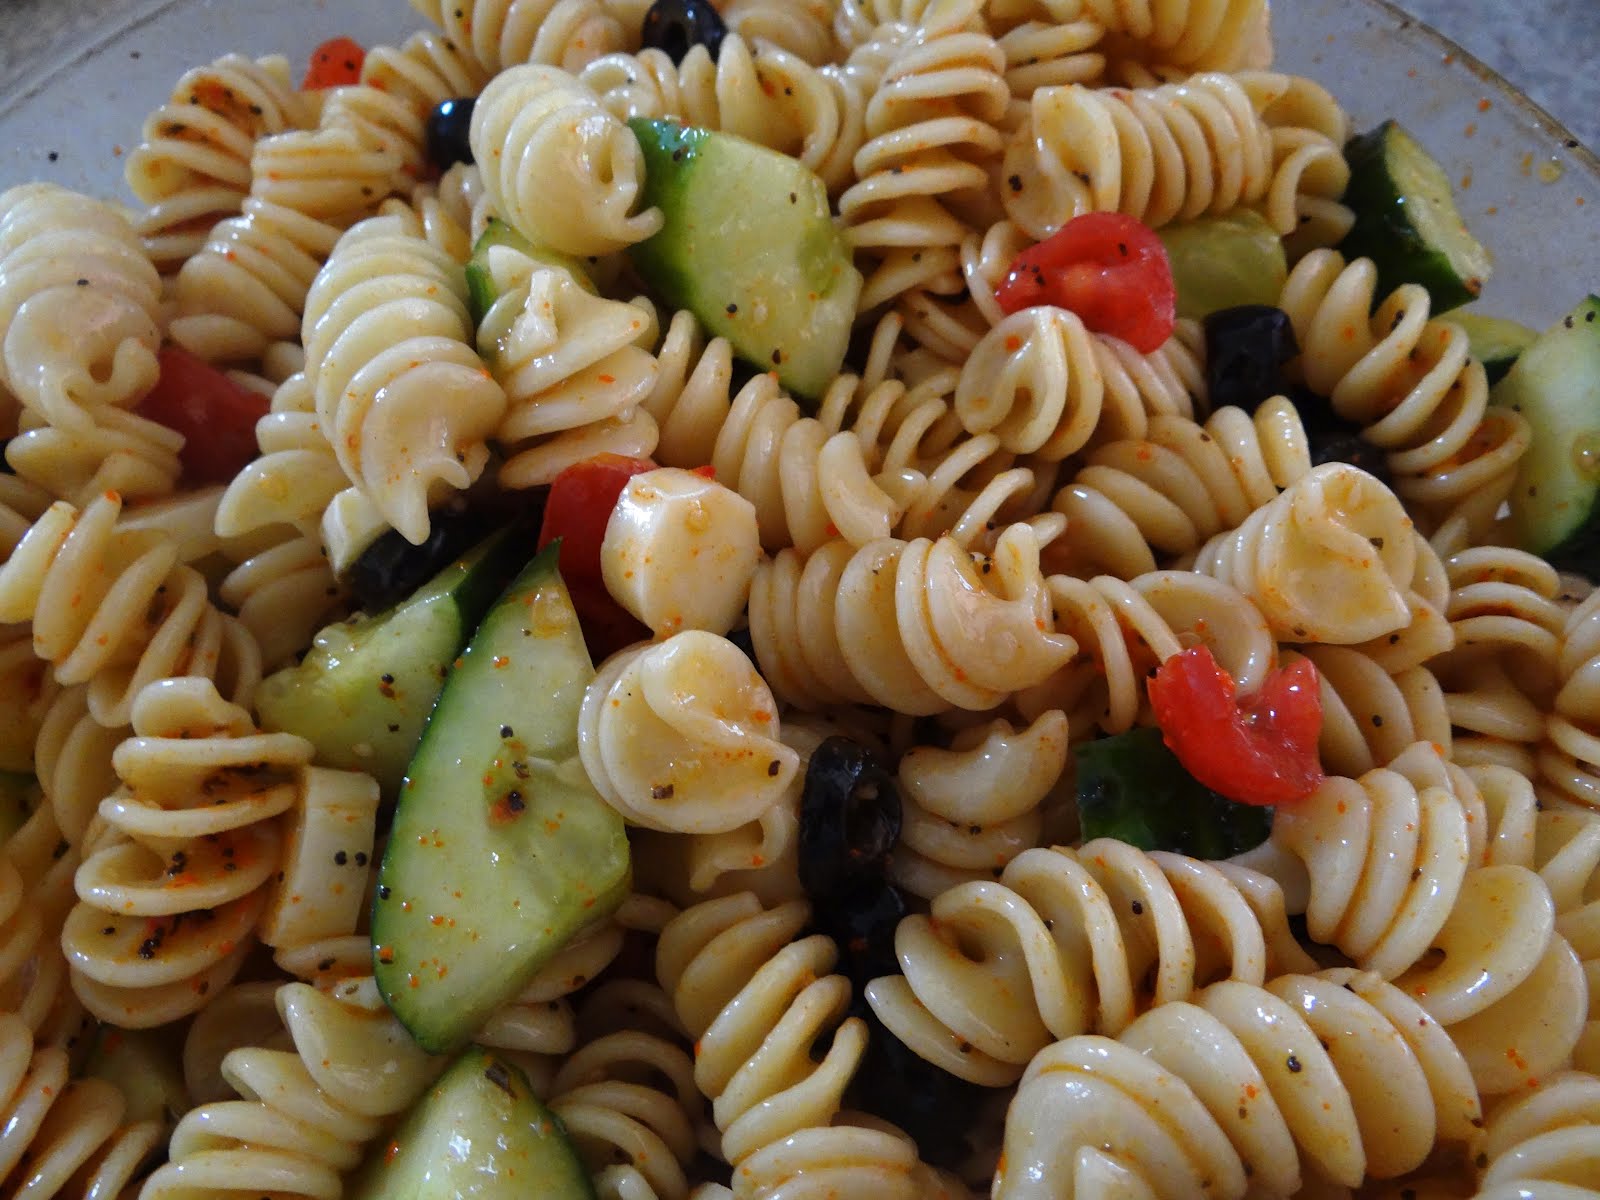 Colorful Pasta Salad Made With Vegetables and Salad Supreme Recipe! My ...